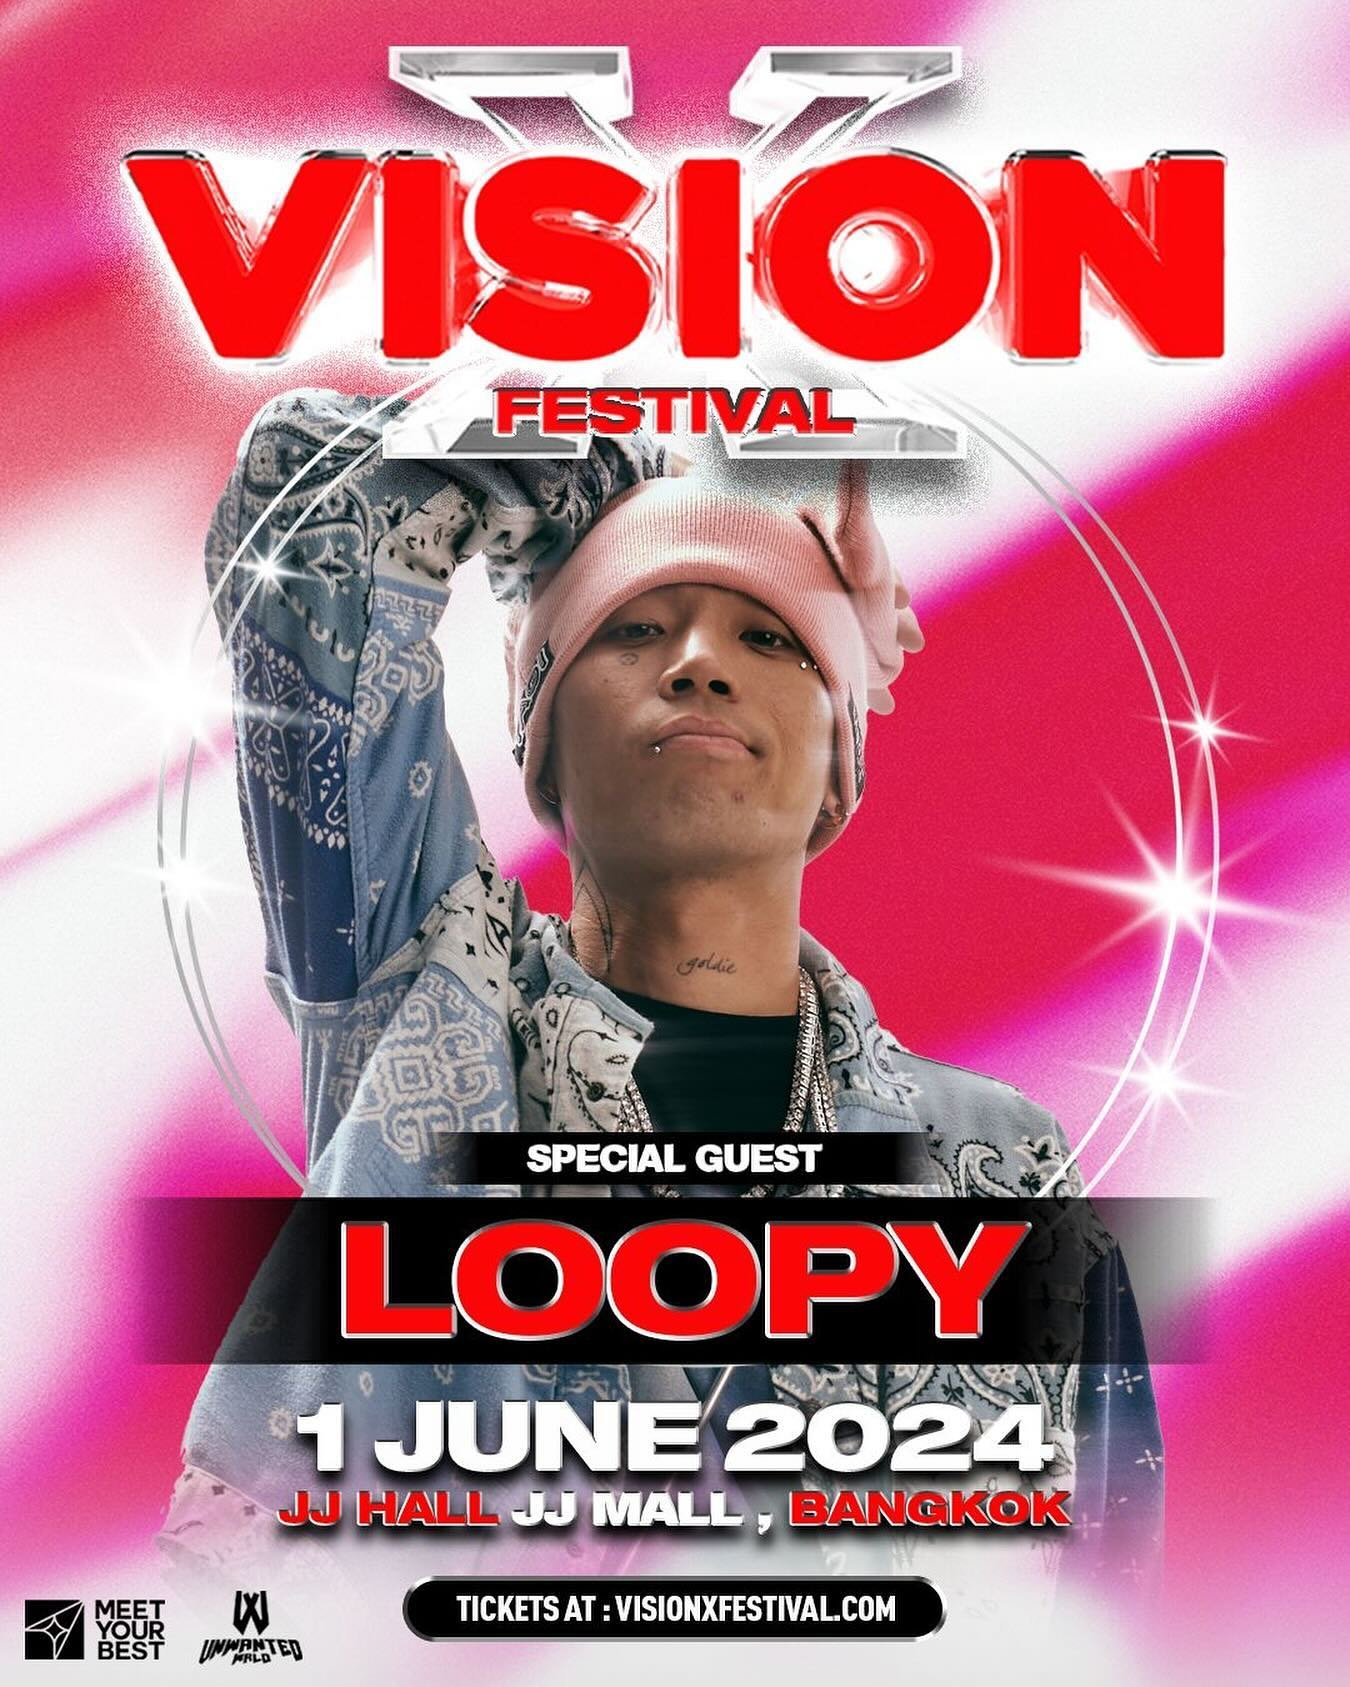 Welcome our next special guest &lsquo;Loopy&rsquo; from South Korea 🇰🇷🔥

ยินดีต้อนรับ Special Guest ขอบเราอีกคน &lsquo;Loopy&rsquo; จากเกาหลีใต้ 🇰🇷🔥

Get tickets now 👉🏼 visionxfestival.com

DATE - 1 JUNE 2024 📆

VENUE - JJ HALL, JJ MALL, BAN